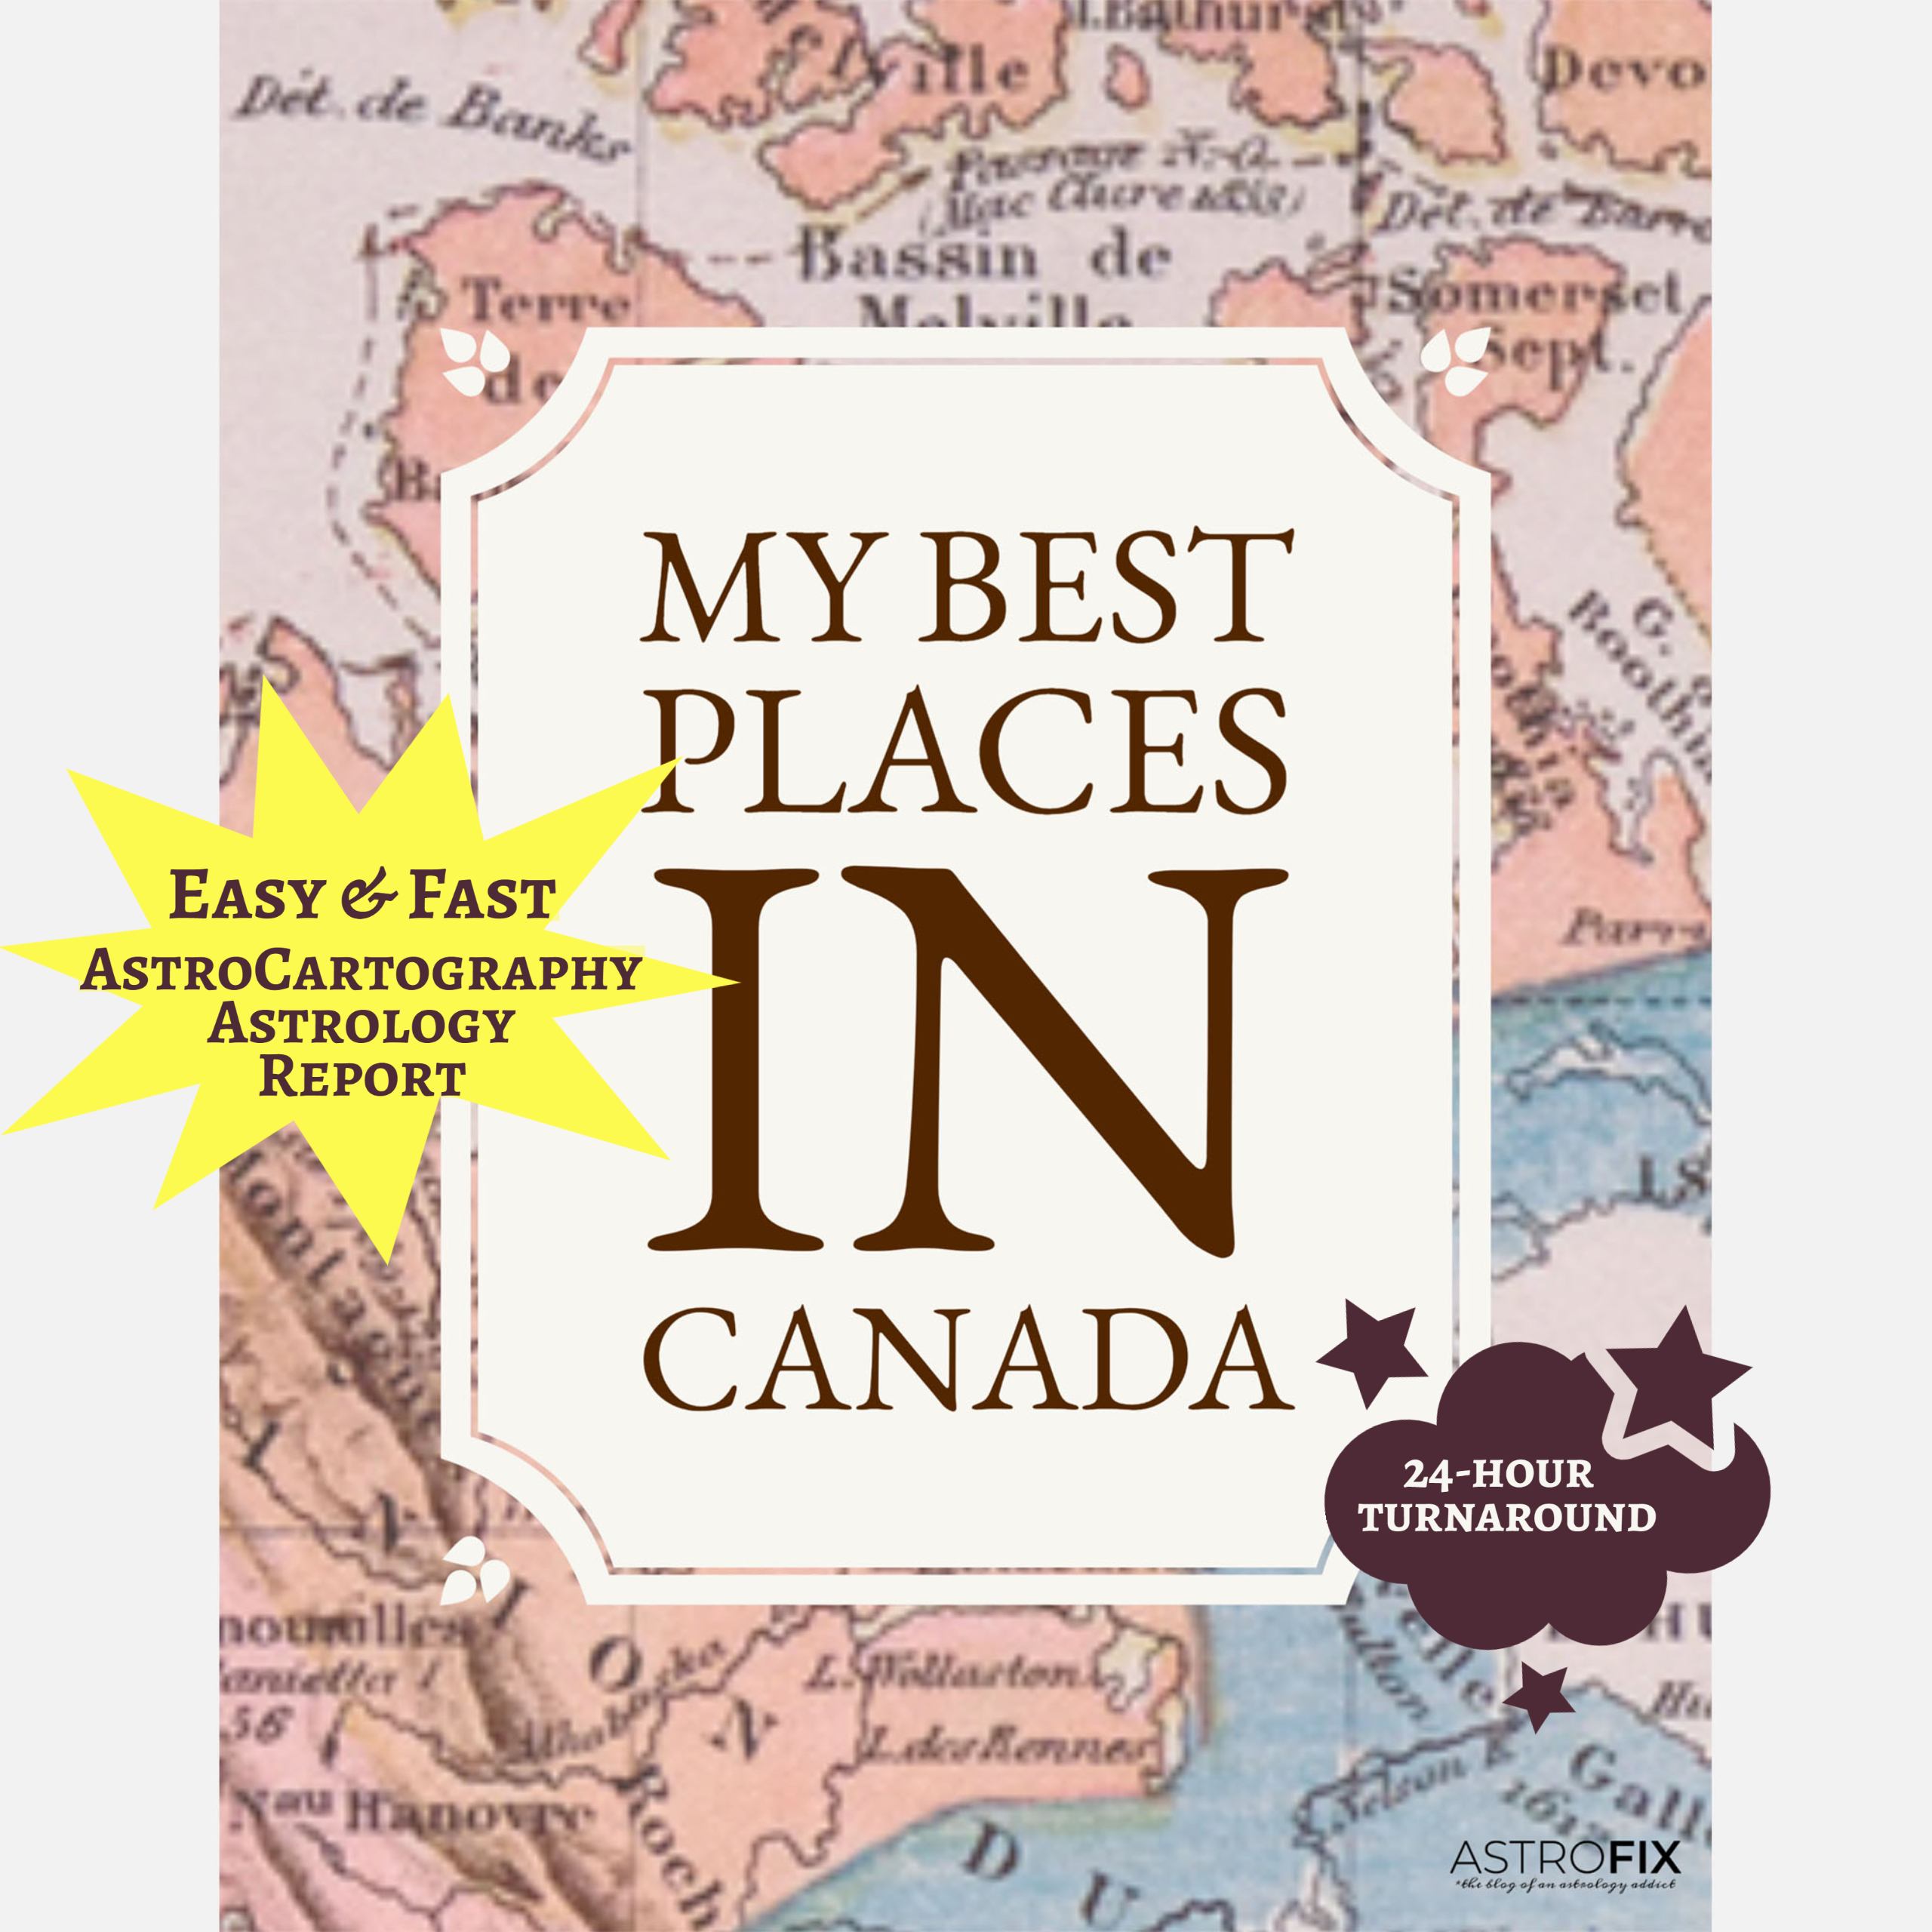 My Best Places in Canada AstroCartography Report,My Best Places in Canada AstroCartography Astrology Report,My Best Places in Canada Relocation Report,Canada AstroCartography Report,astrocartography relocation astrology,astrolocality Canada,relocate